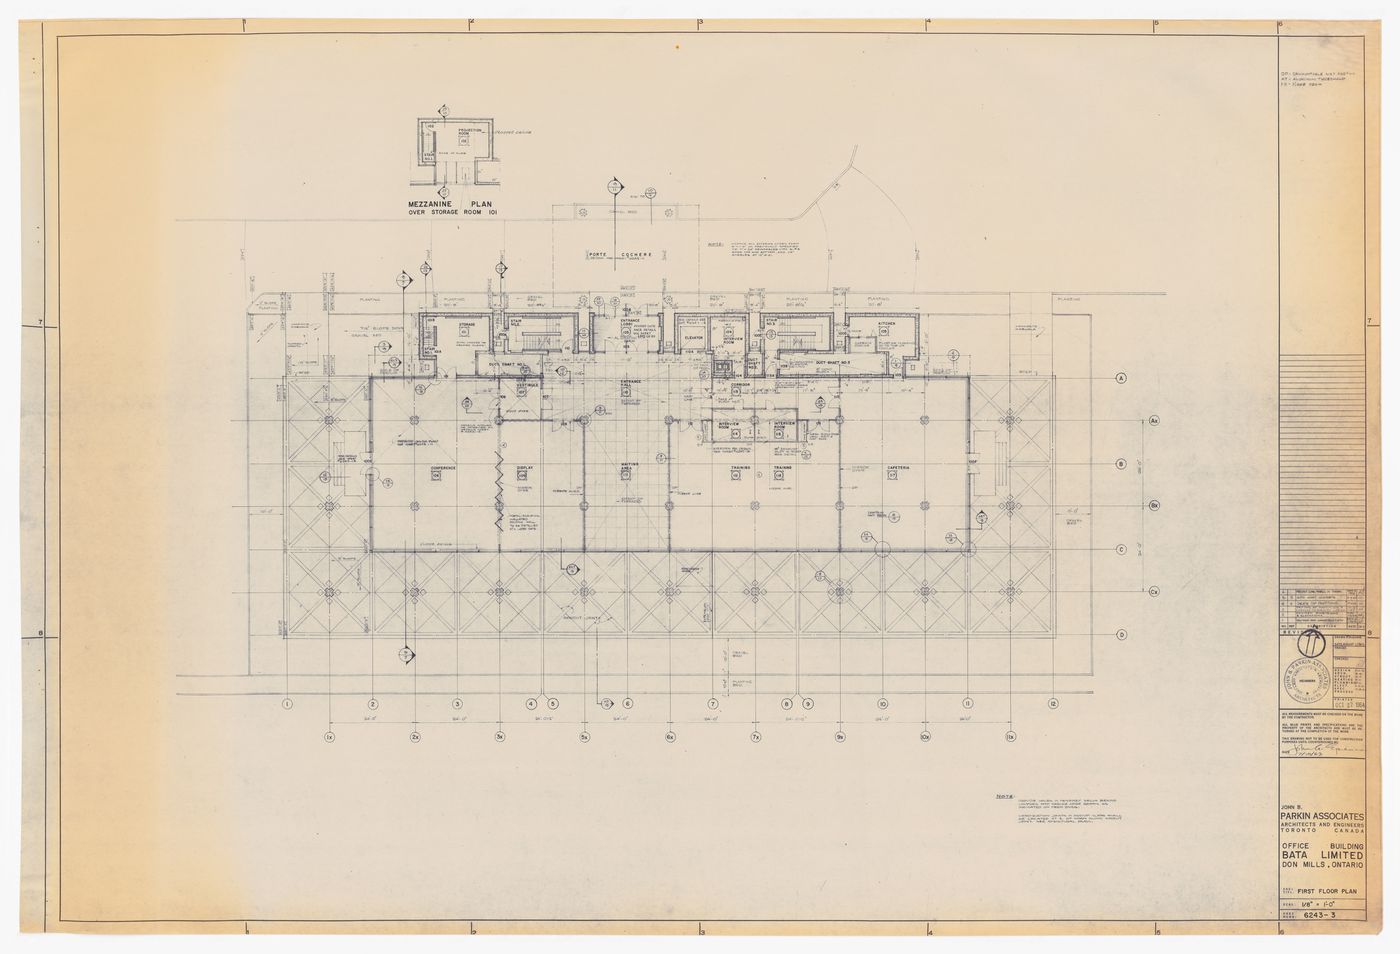 First floor plan for Bata Limited Office Building, Don Mills, Ontario